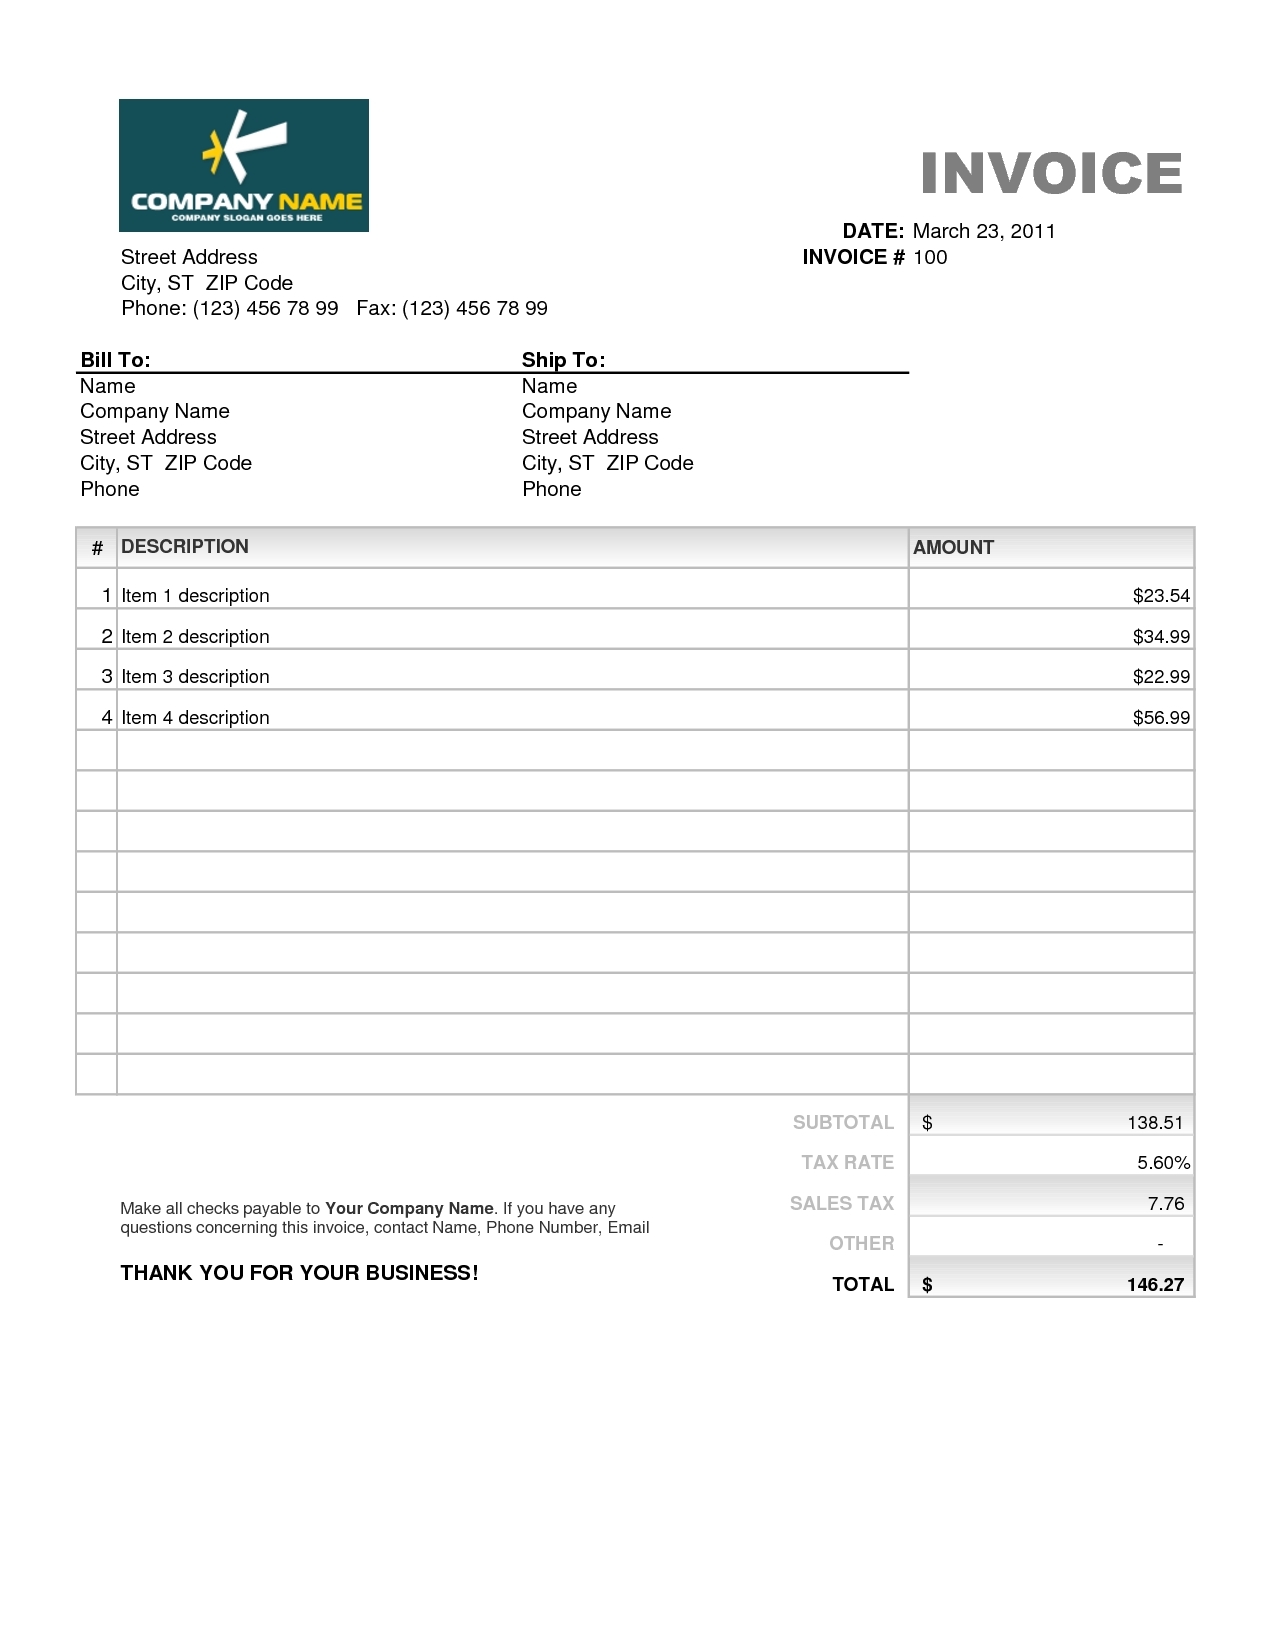 invoice excel template free download make invoice template free invoice template 1275 X 1650